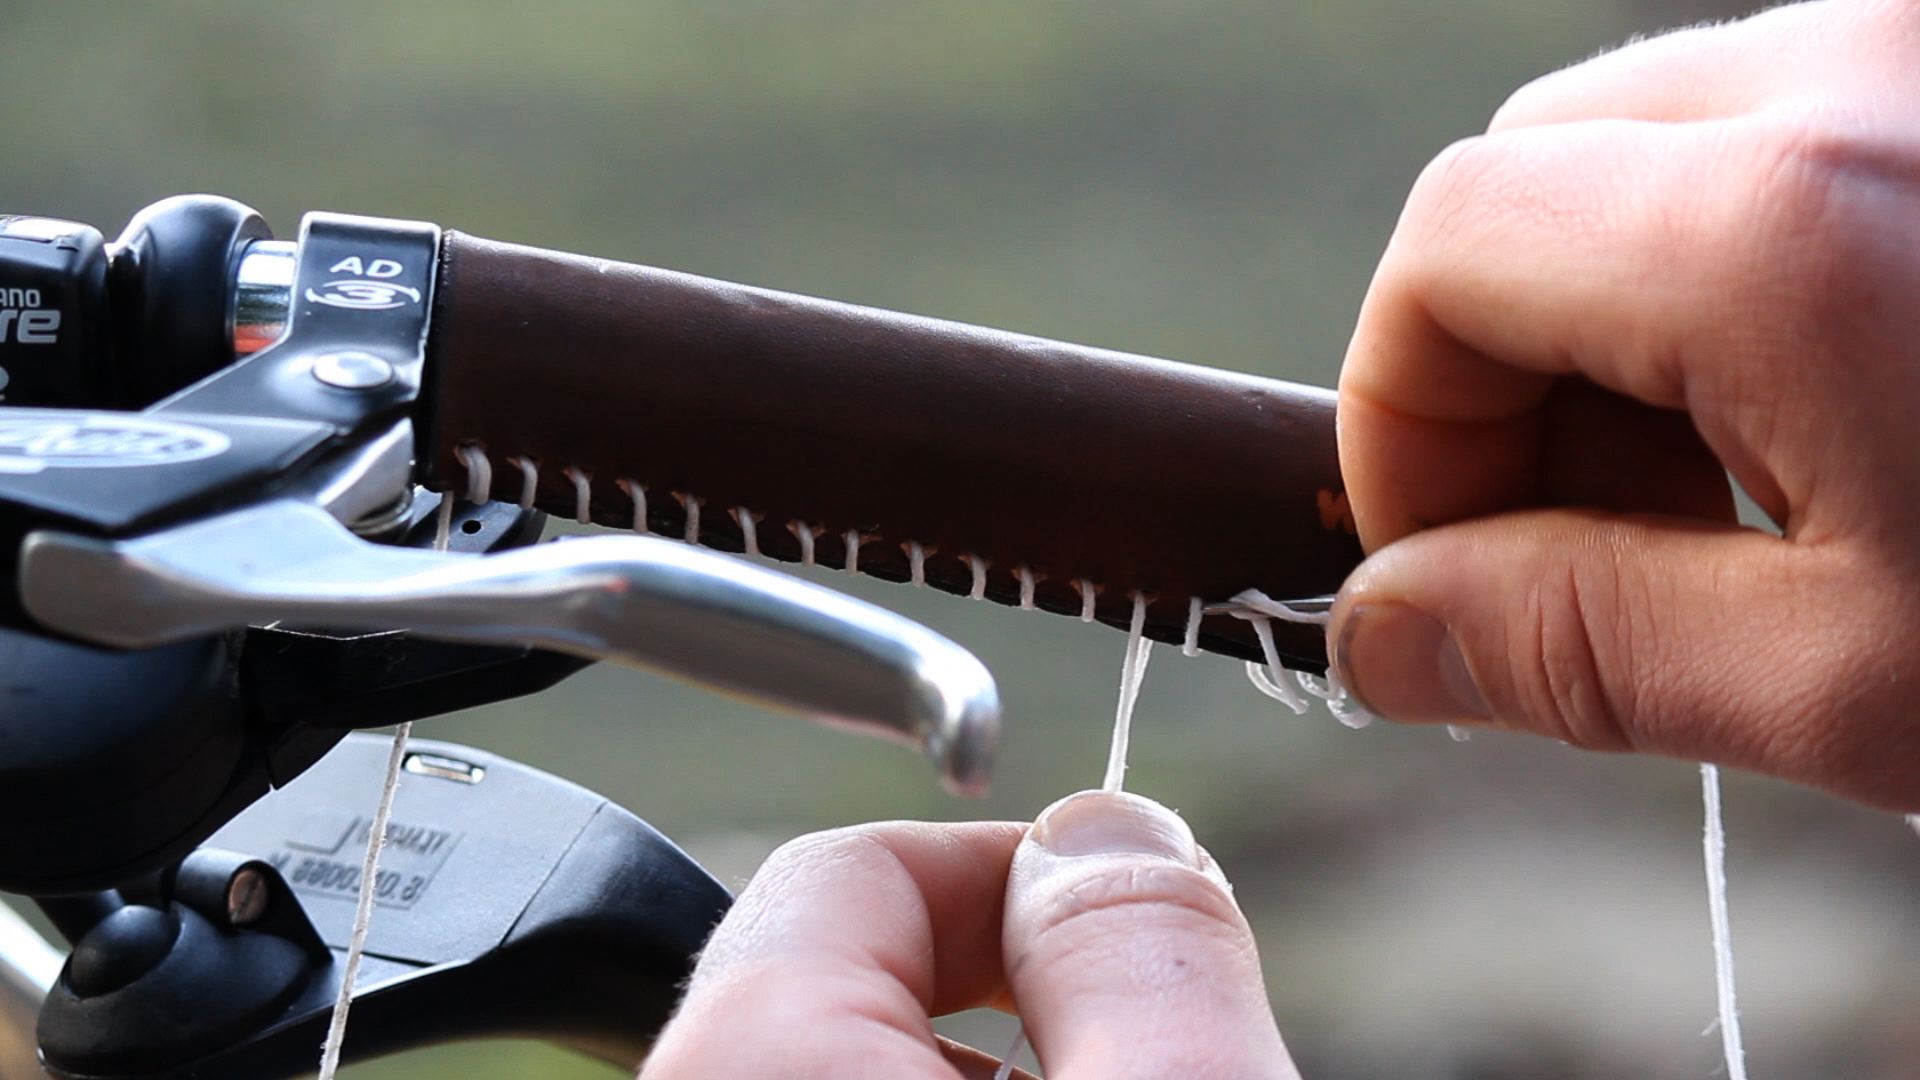 Q & A: Which way to align the stitching on your grips?